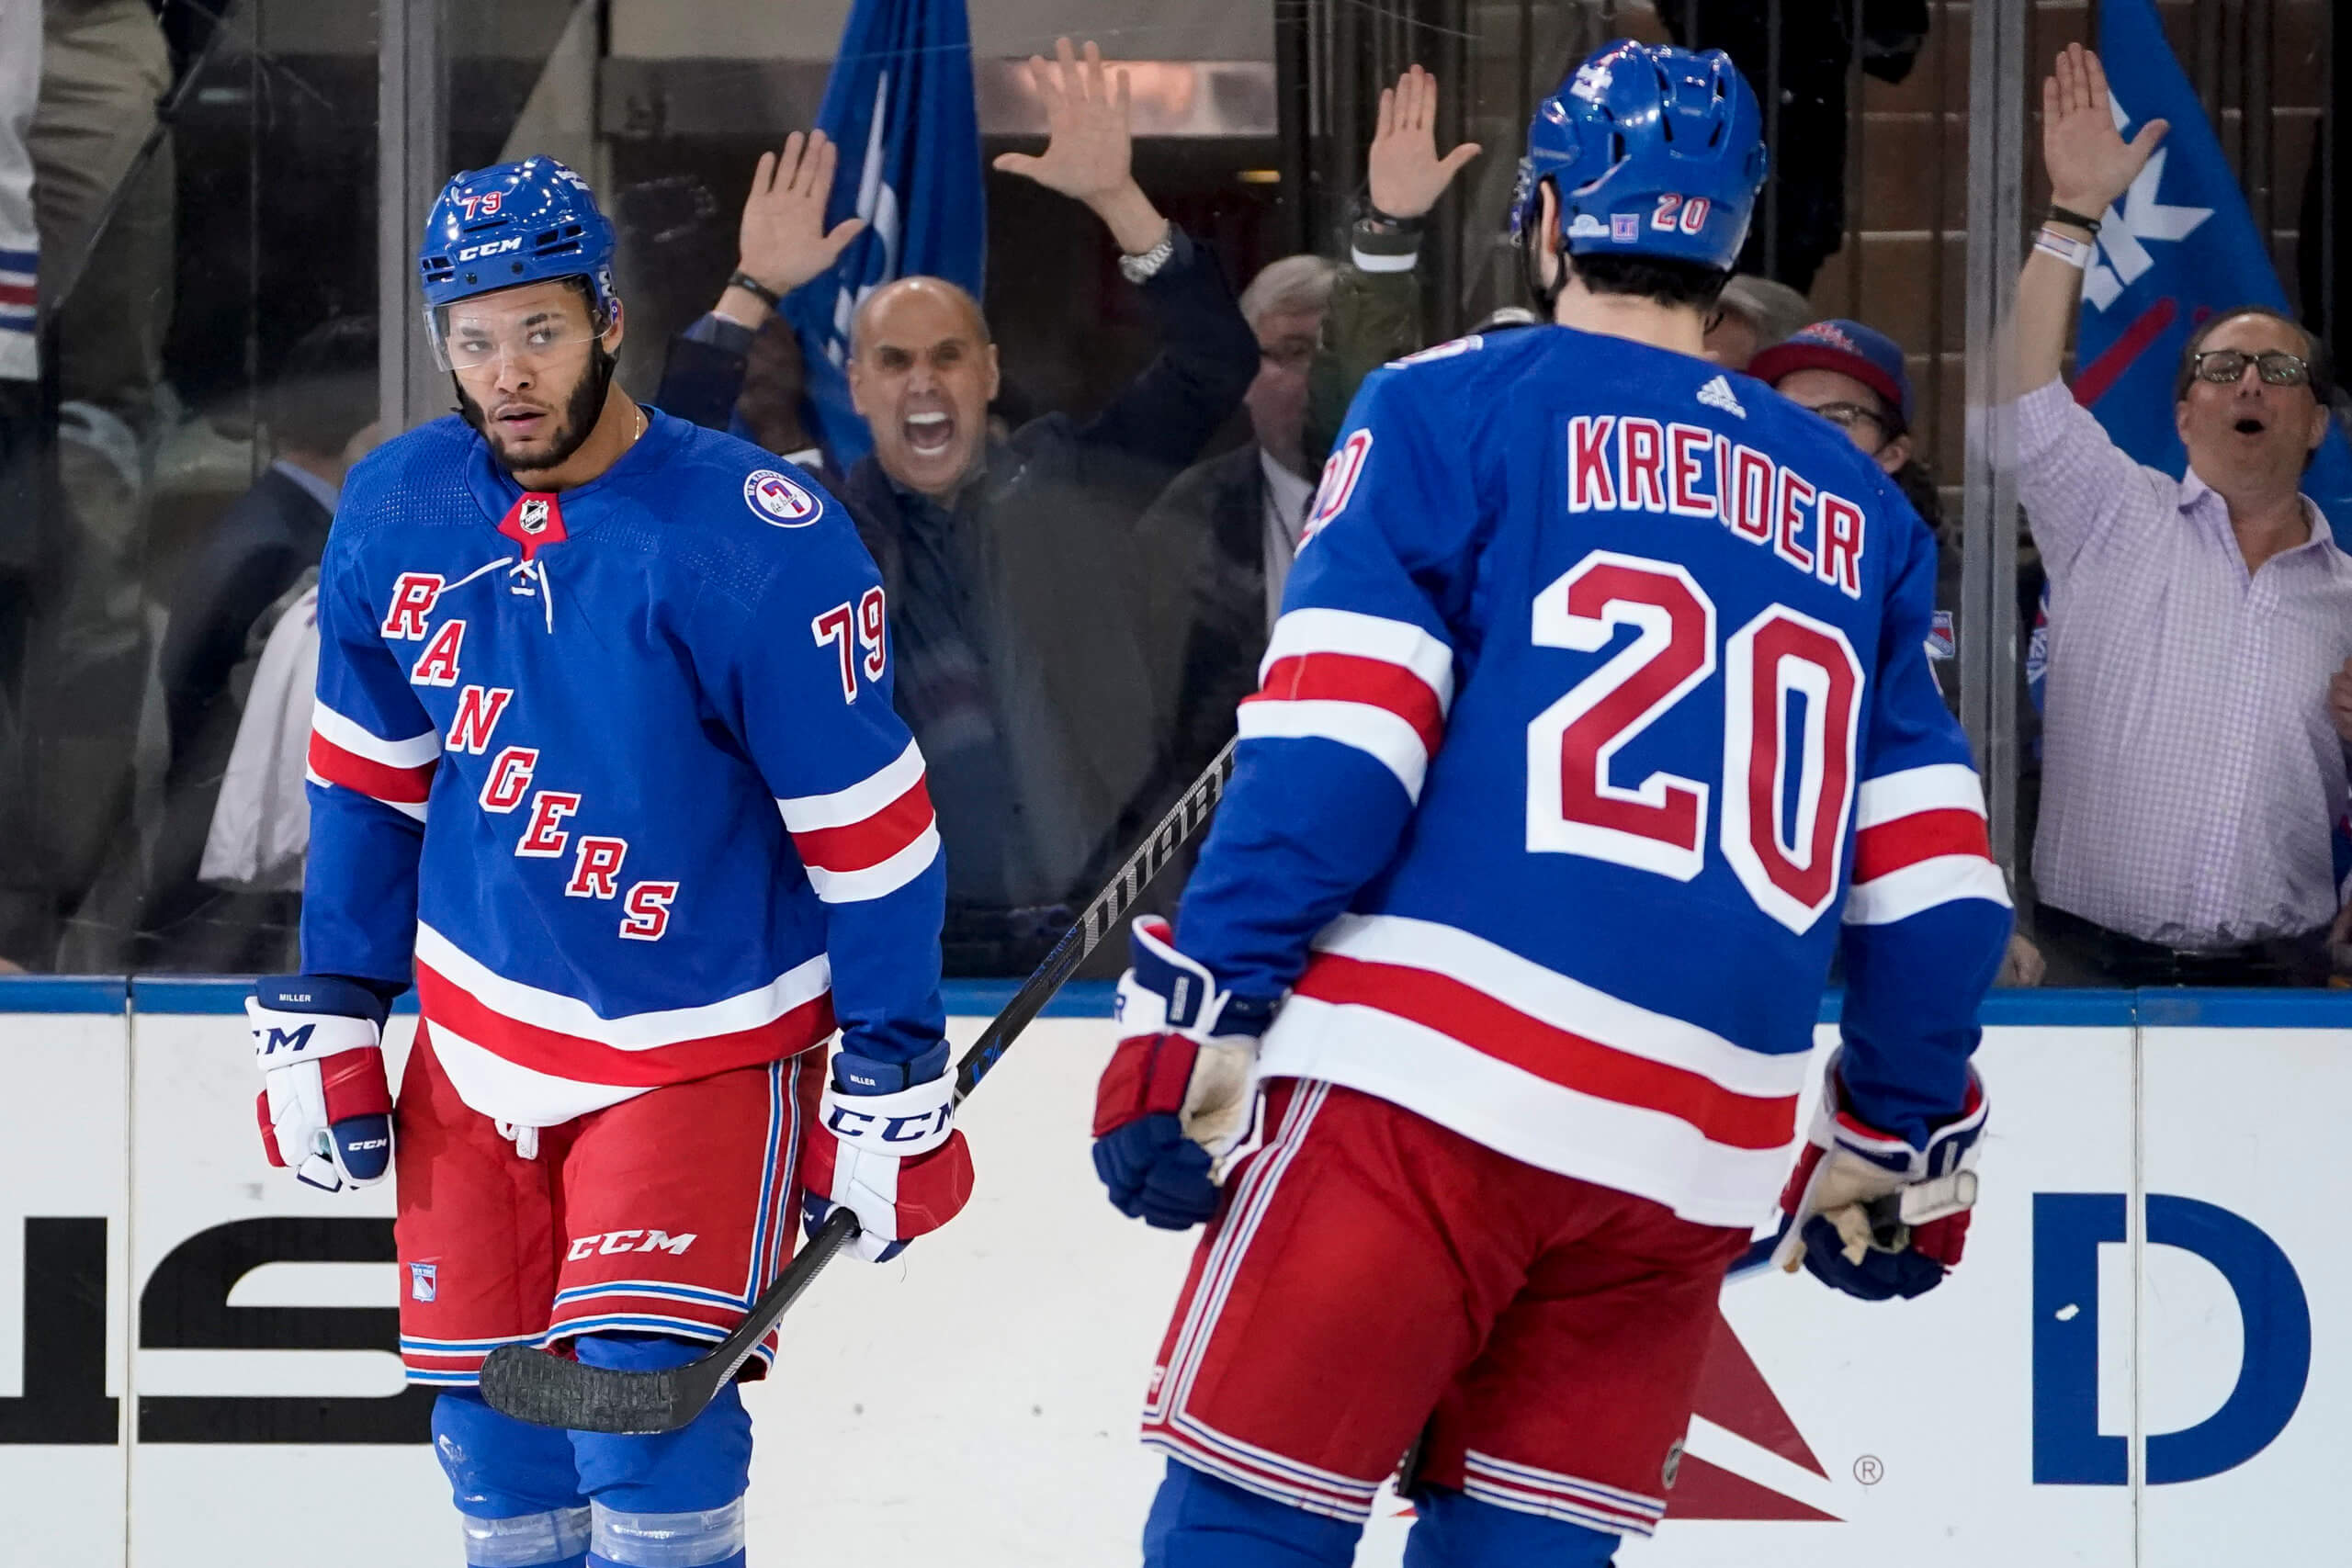 New York Rangers: Trading Chris Kreider is the only way to truly rebuild